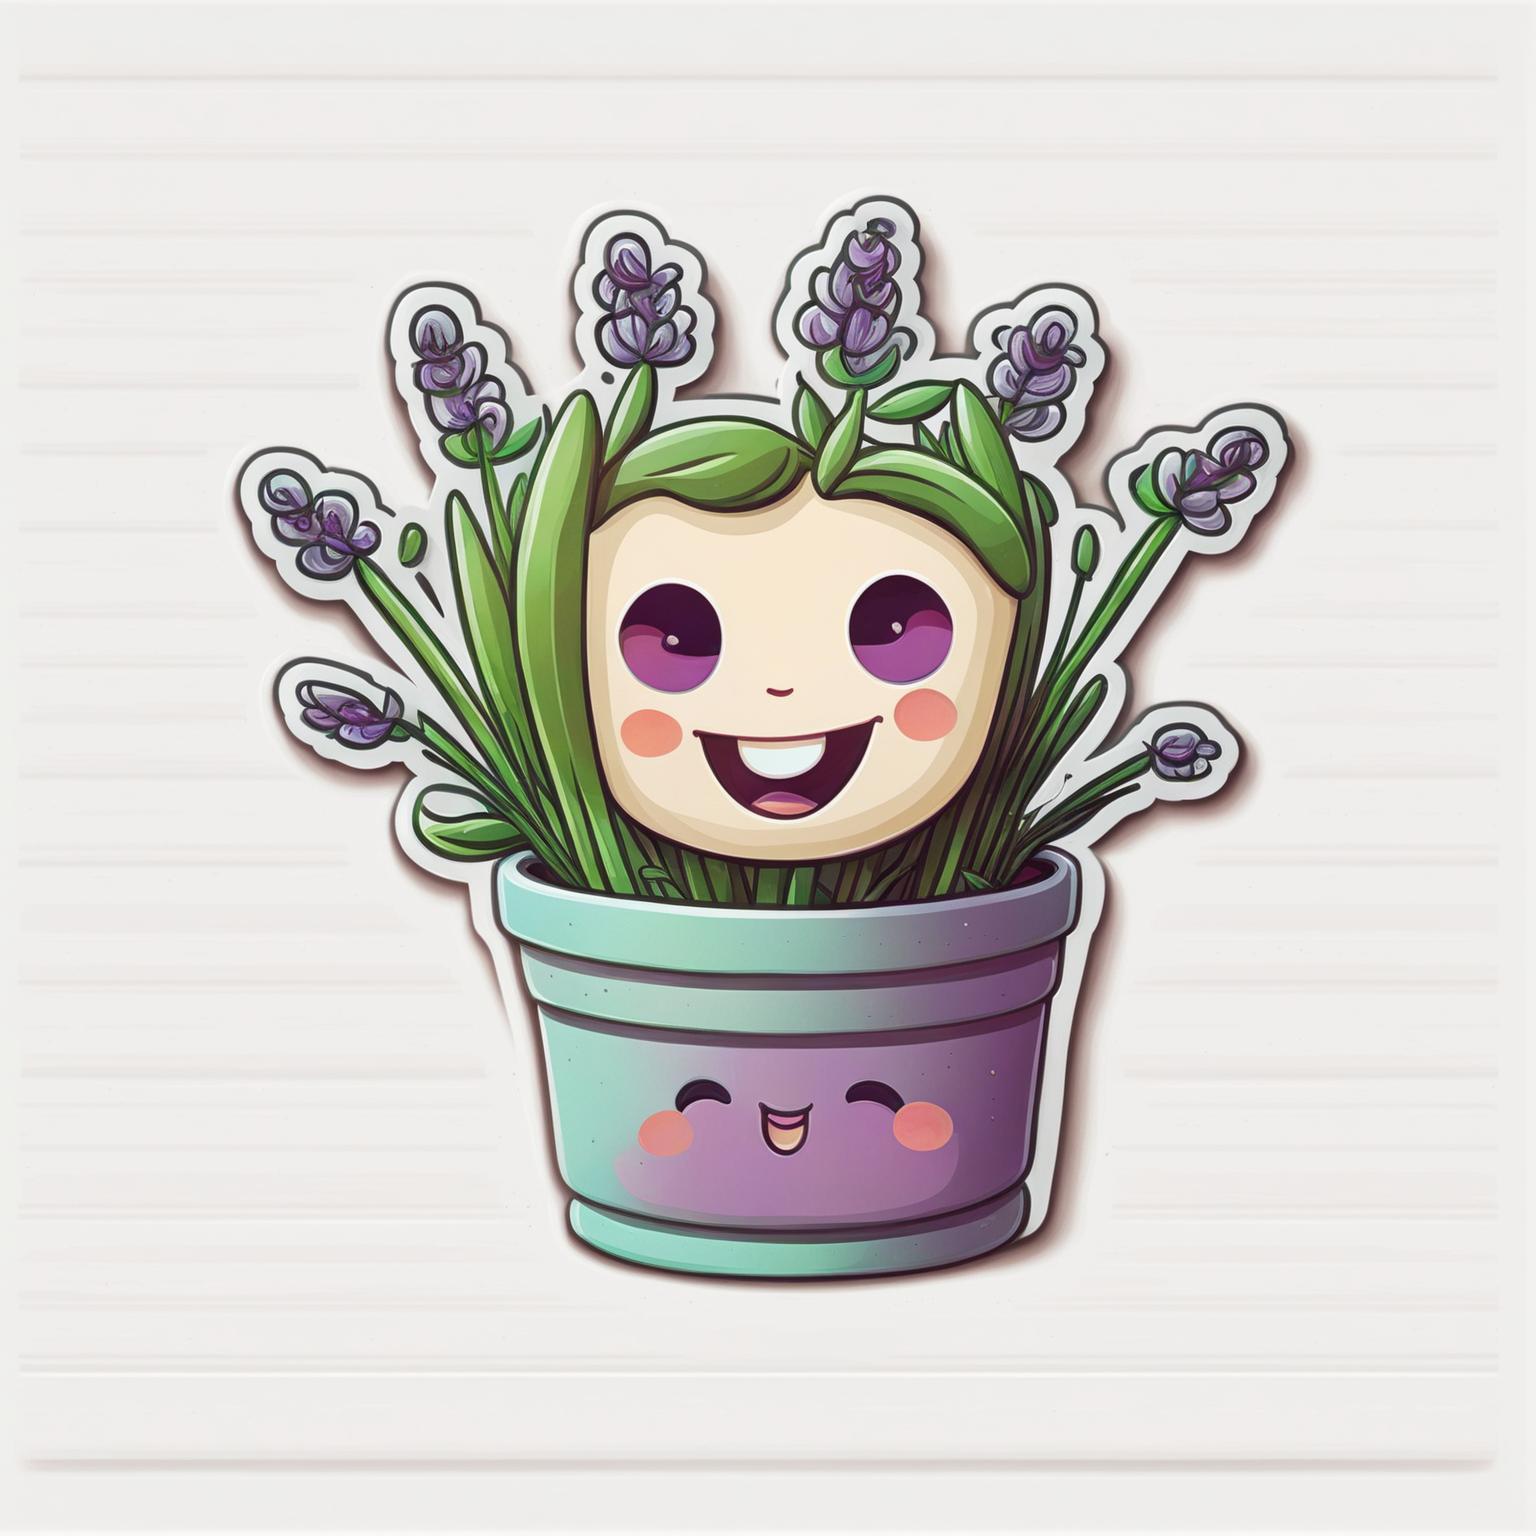 Design a cute Lavender plant sticker with slender green stems and vibrant purple flowers